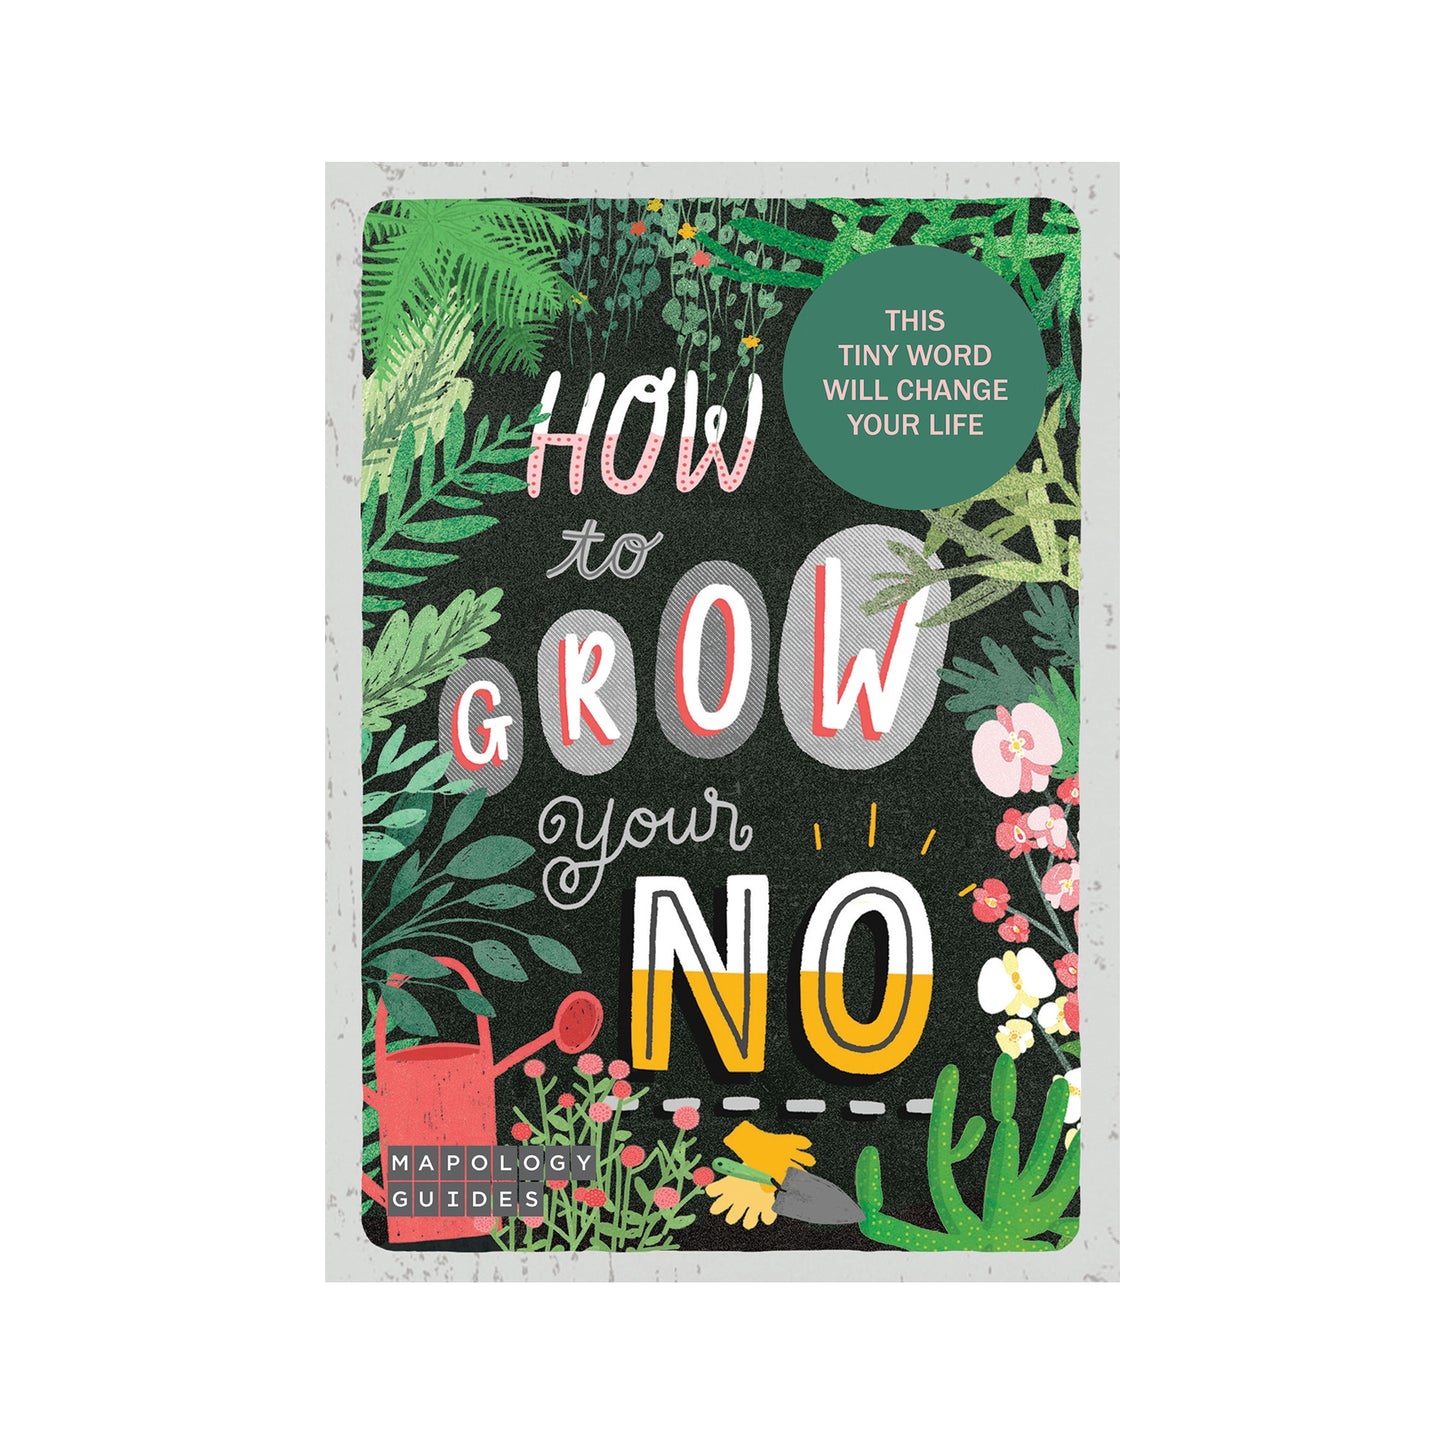 How To Grow Your No